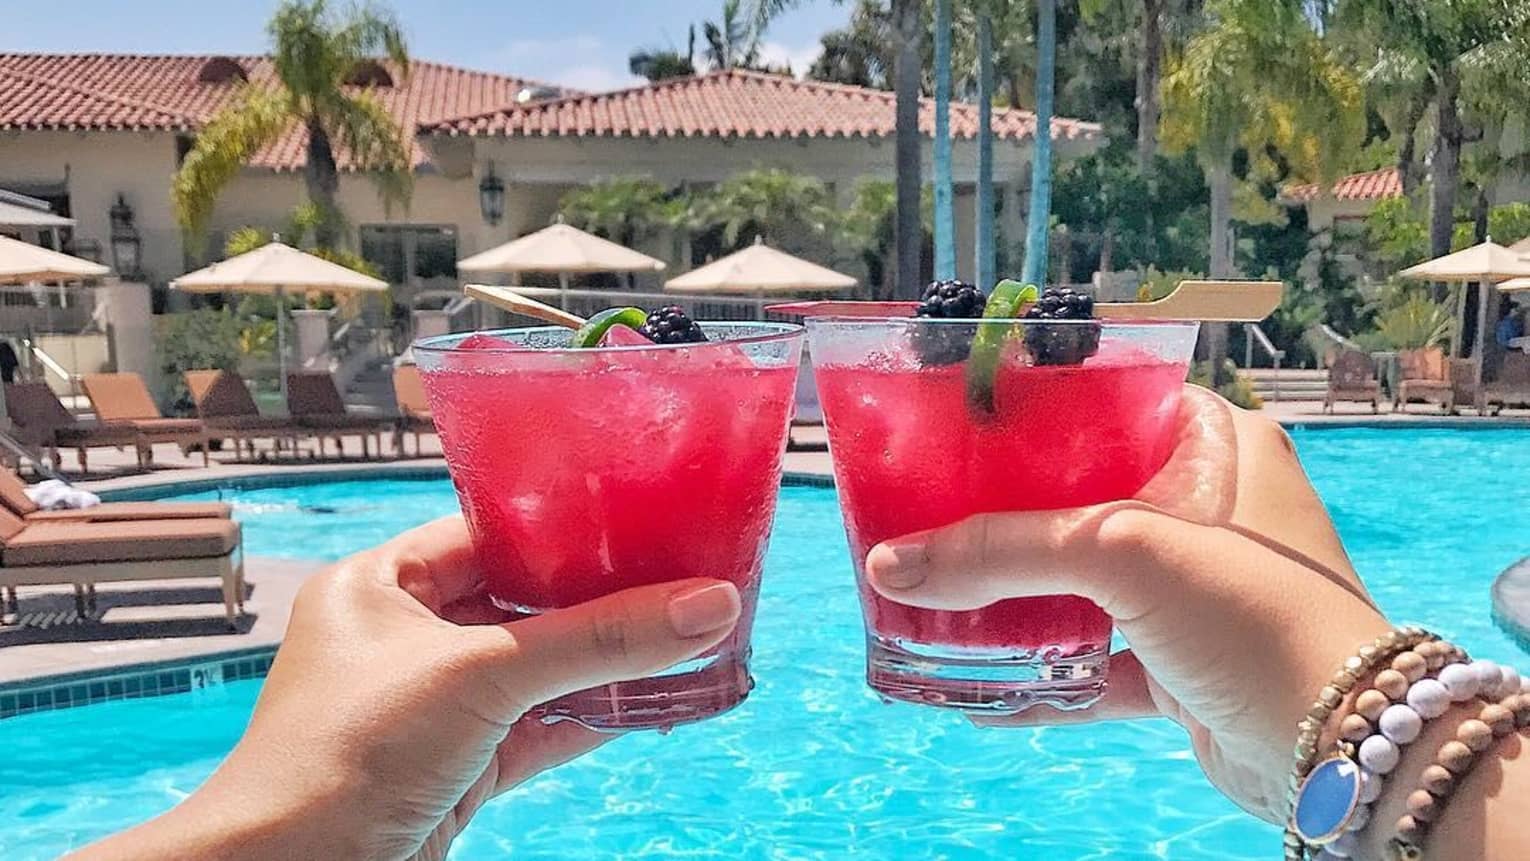 Hands toasting with red cocktails with fruity lime and blackberry garnish, in front of sunny swimming pool